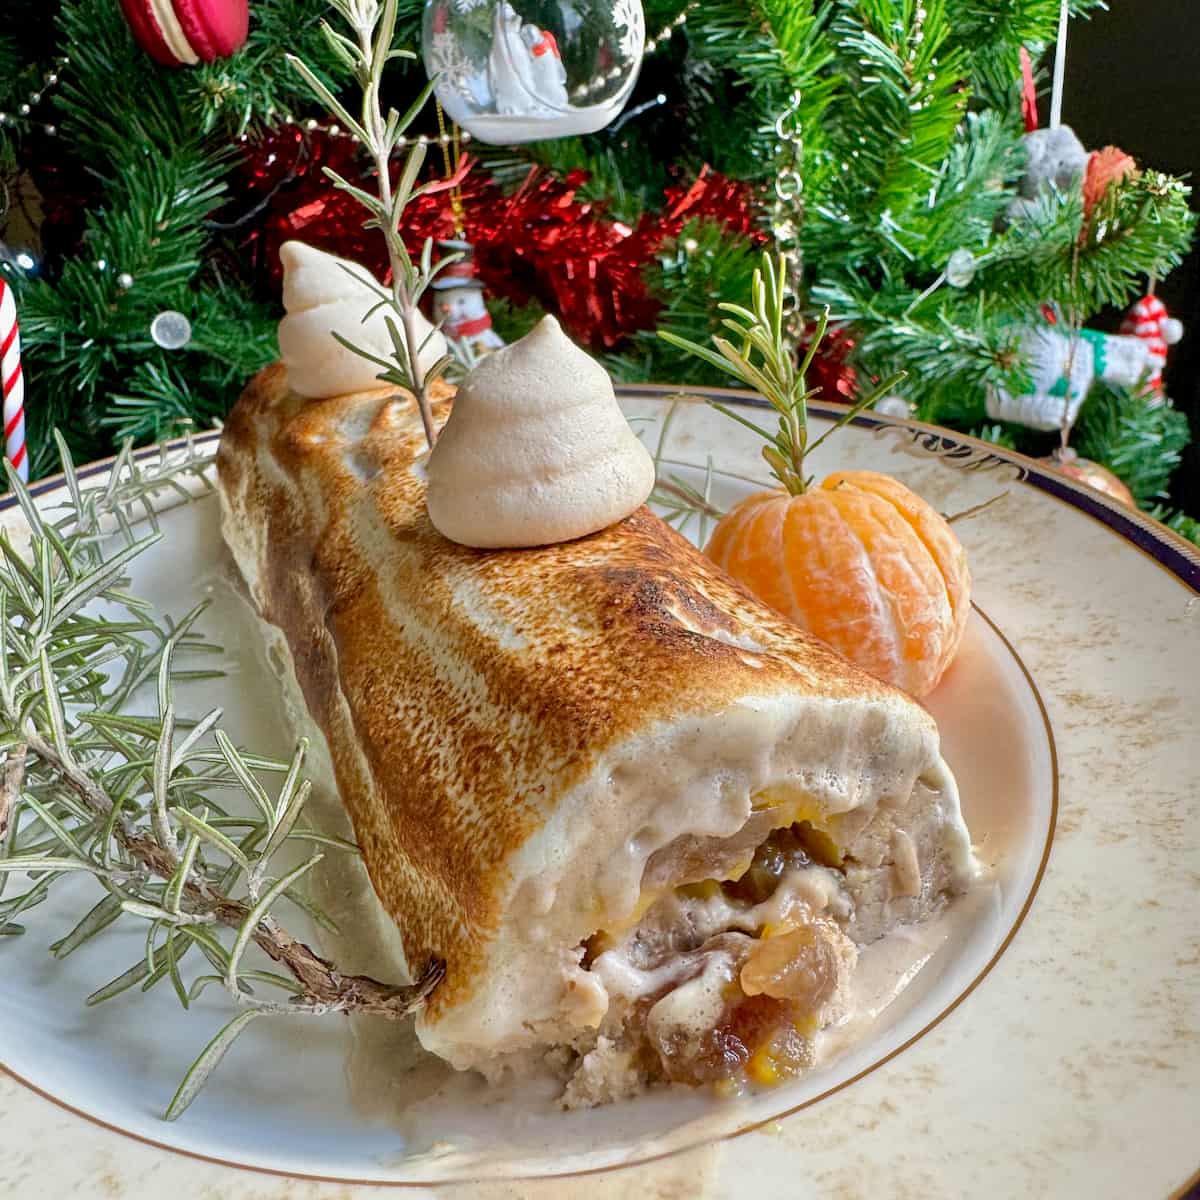 chestnut ice cream log filled with candied chestnuts, orange and topped with toasted meringue